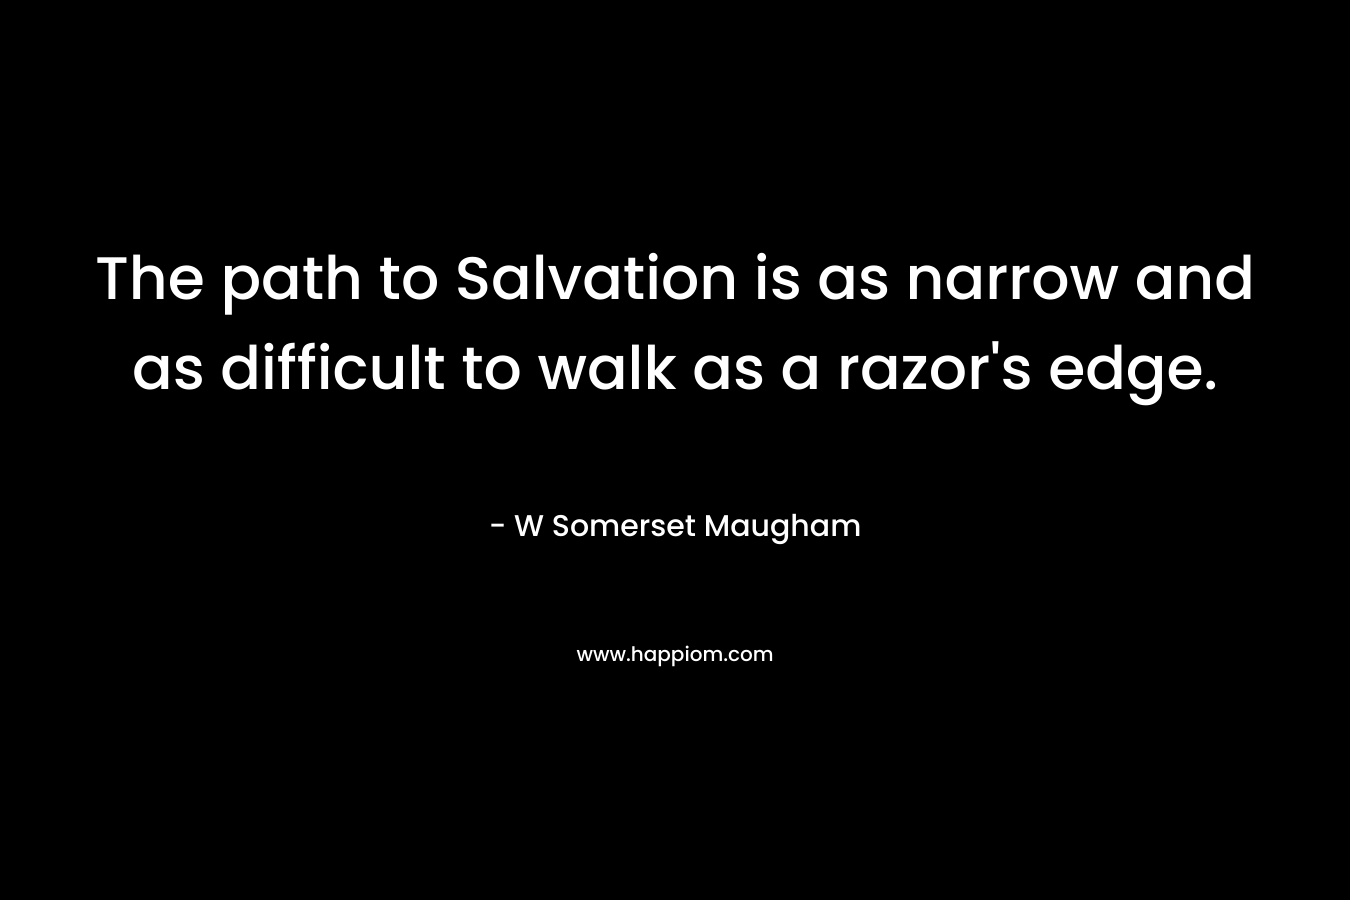 The path to Salvation is as narrow and as difficult to walk as a razor’s edge. – W Somerset Maugham